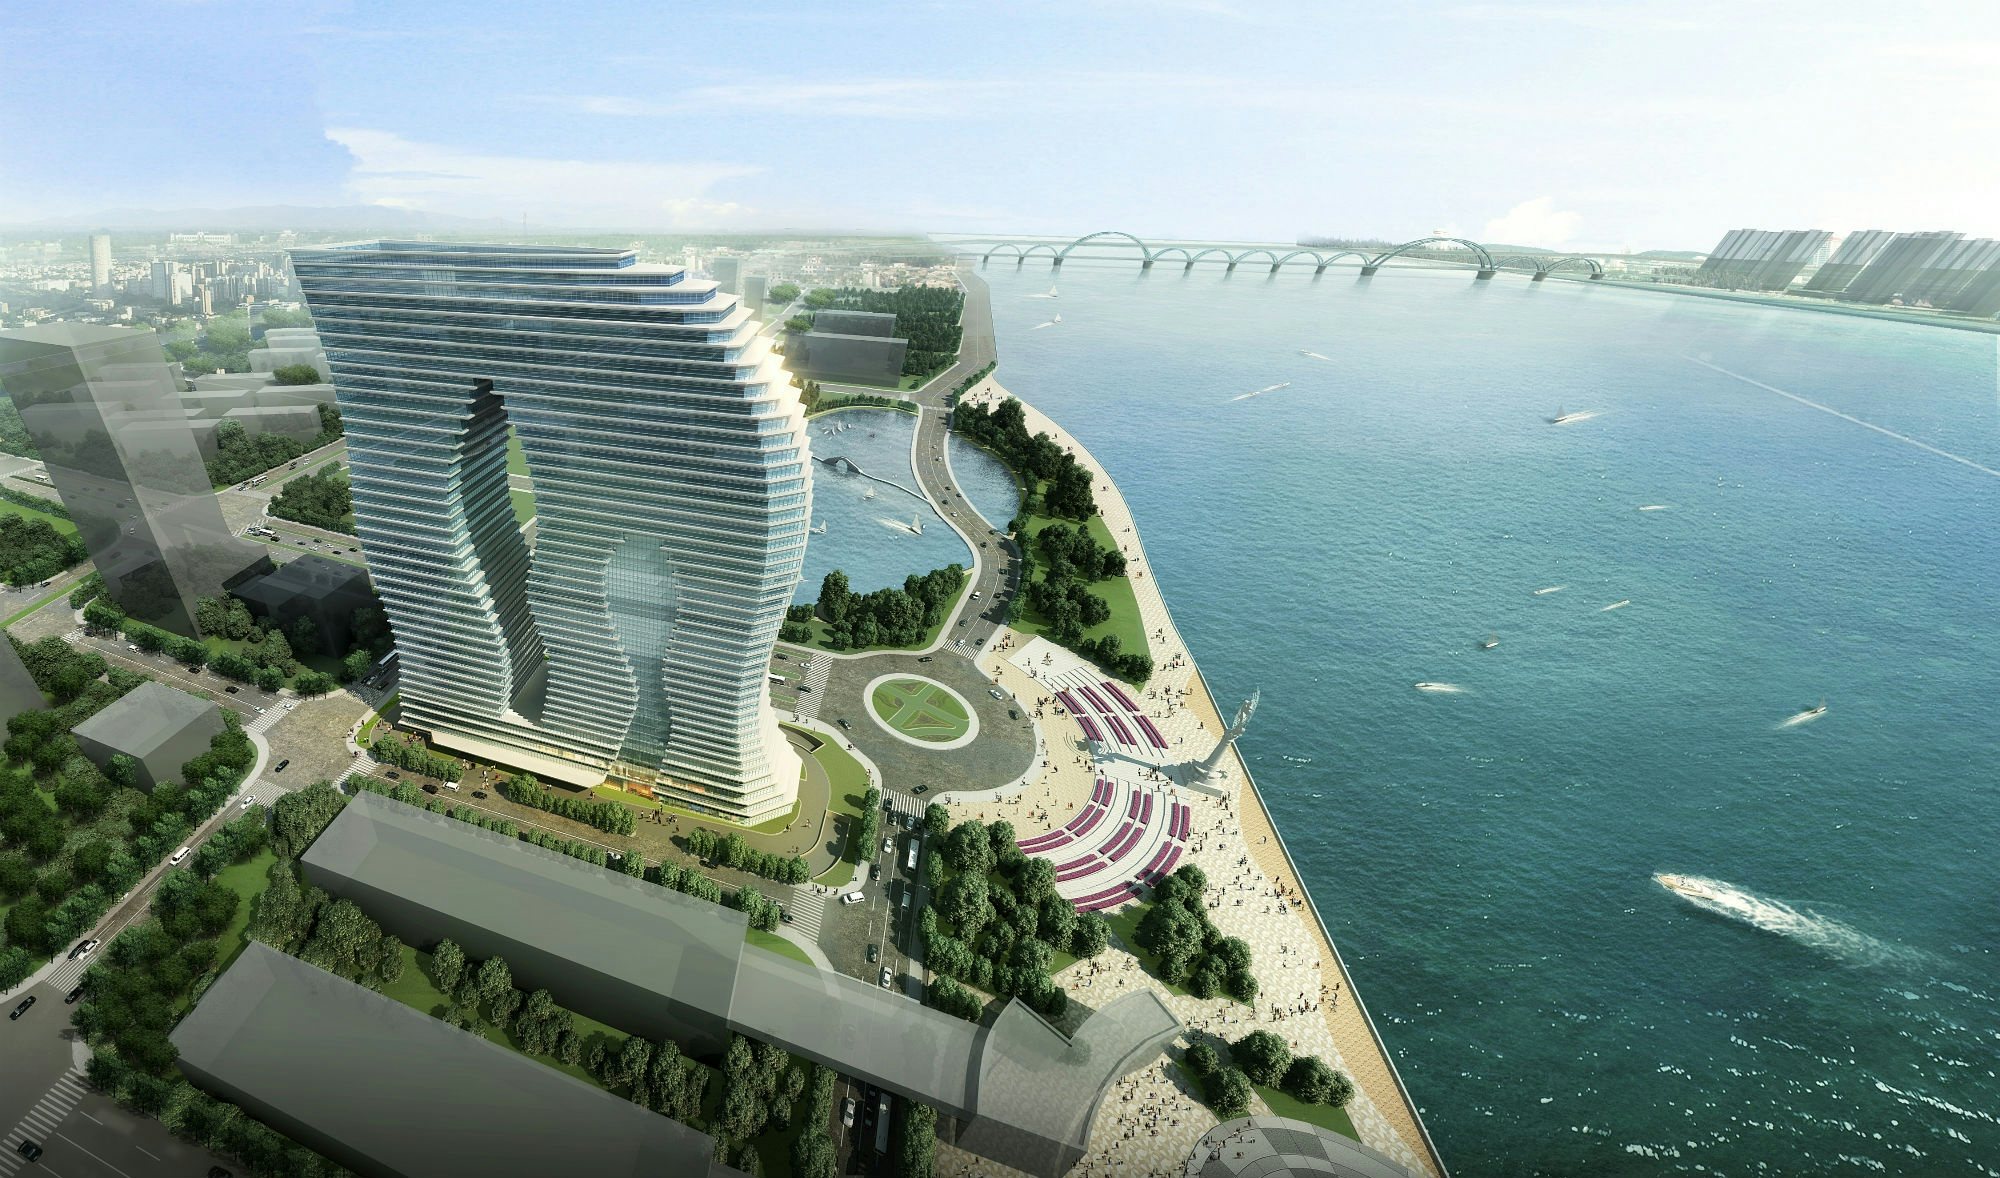 When completed, In Hangzhou will comprise of residences, a hotel, and commercial spaces overlooking the Qiantang River. (Courtesy Photo)